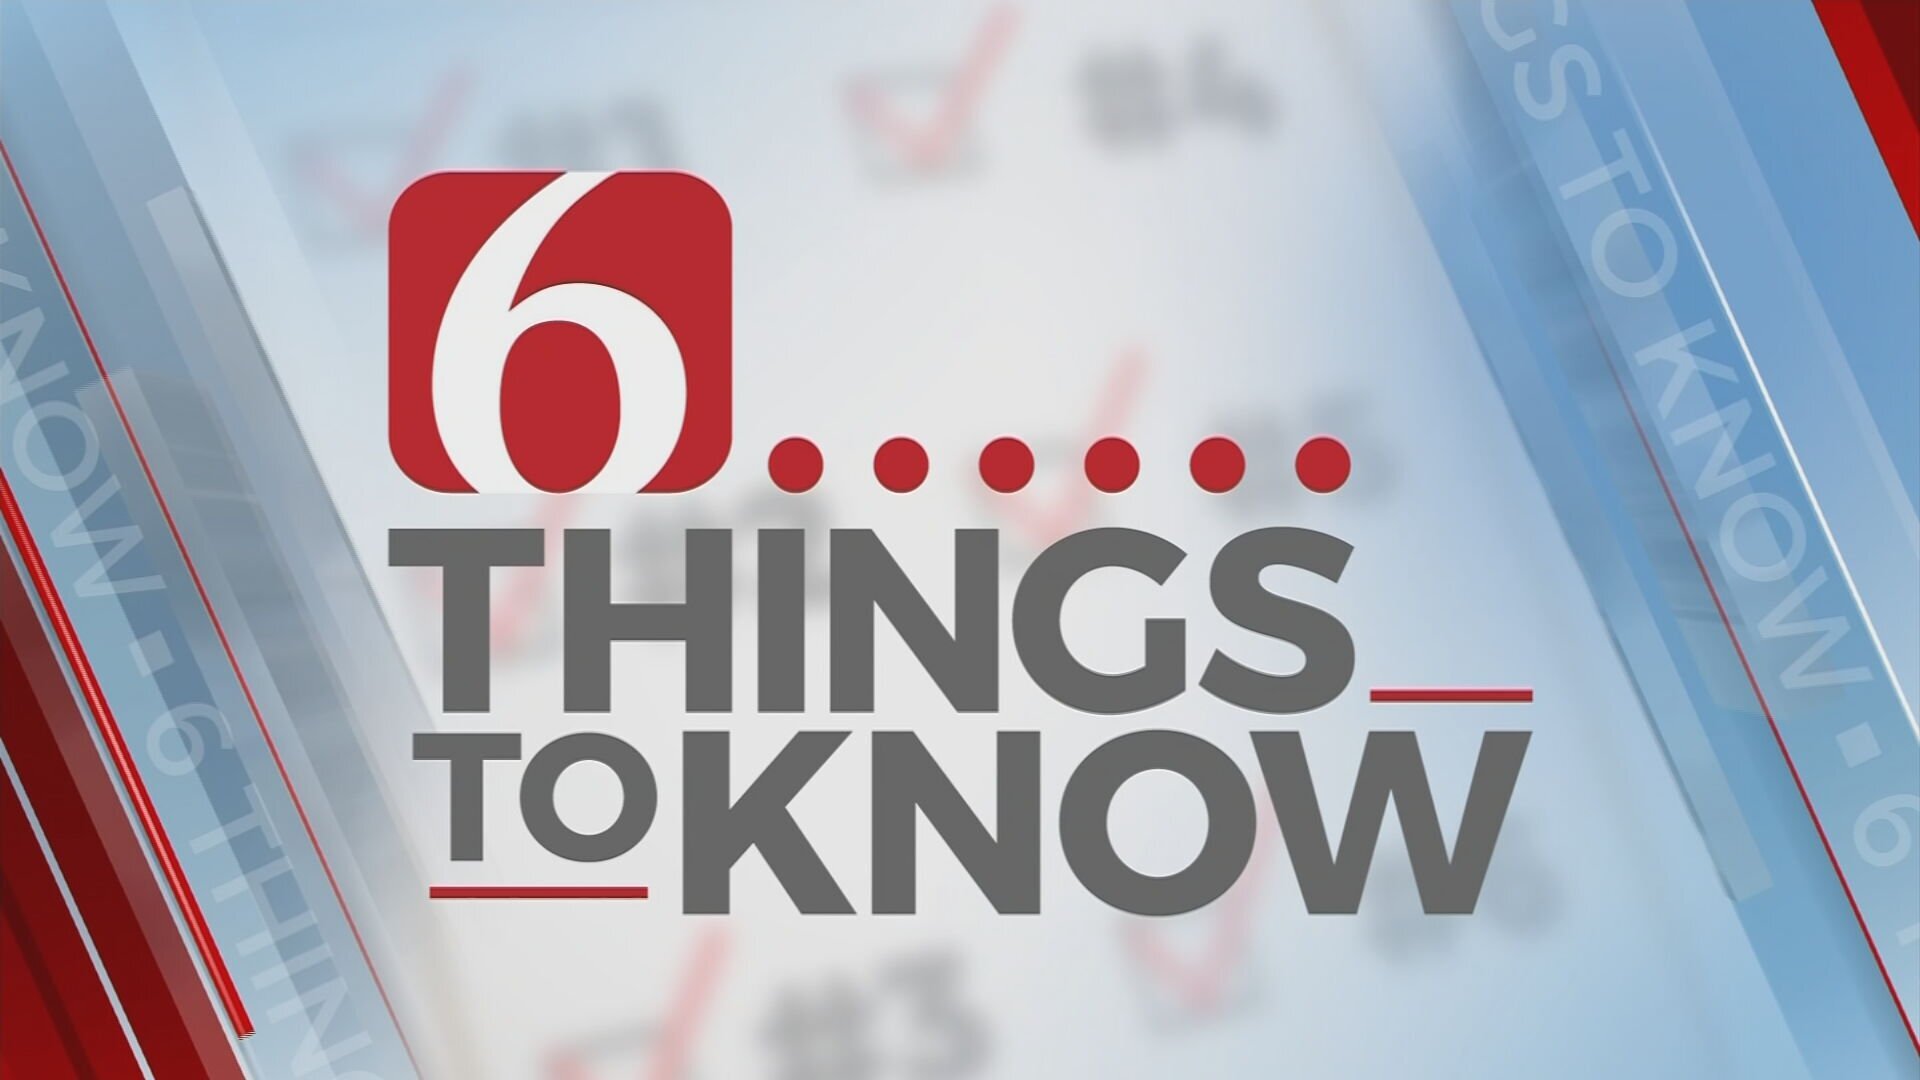 6 Things To Know (Oct 28): New Airplane Fleet & Sanitizing The Polls 